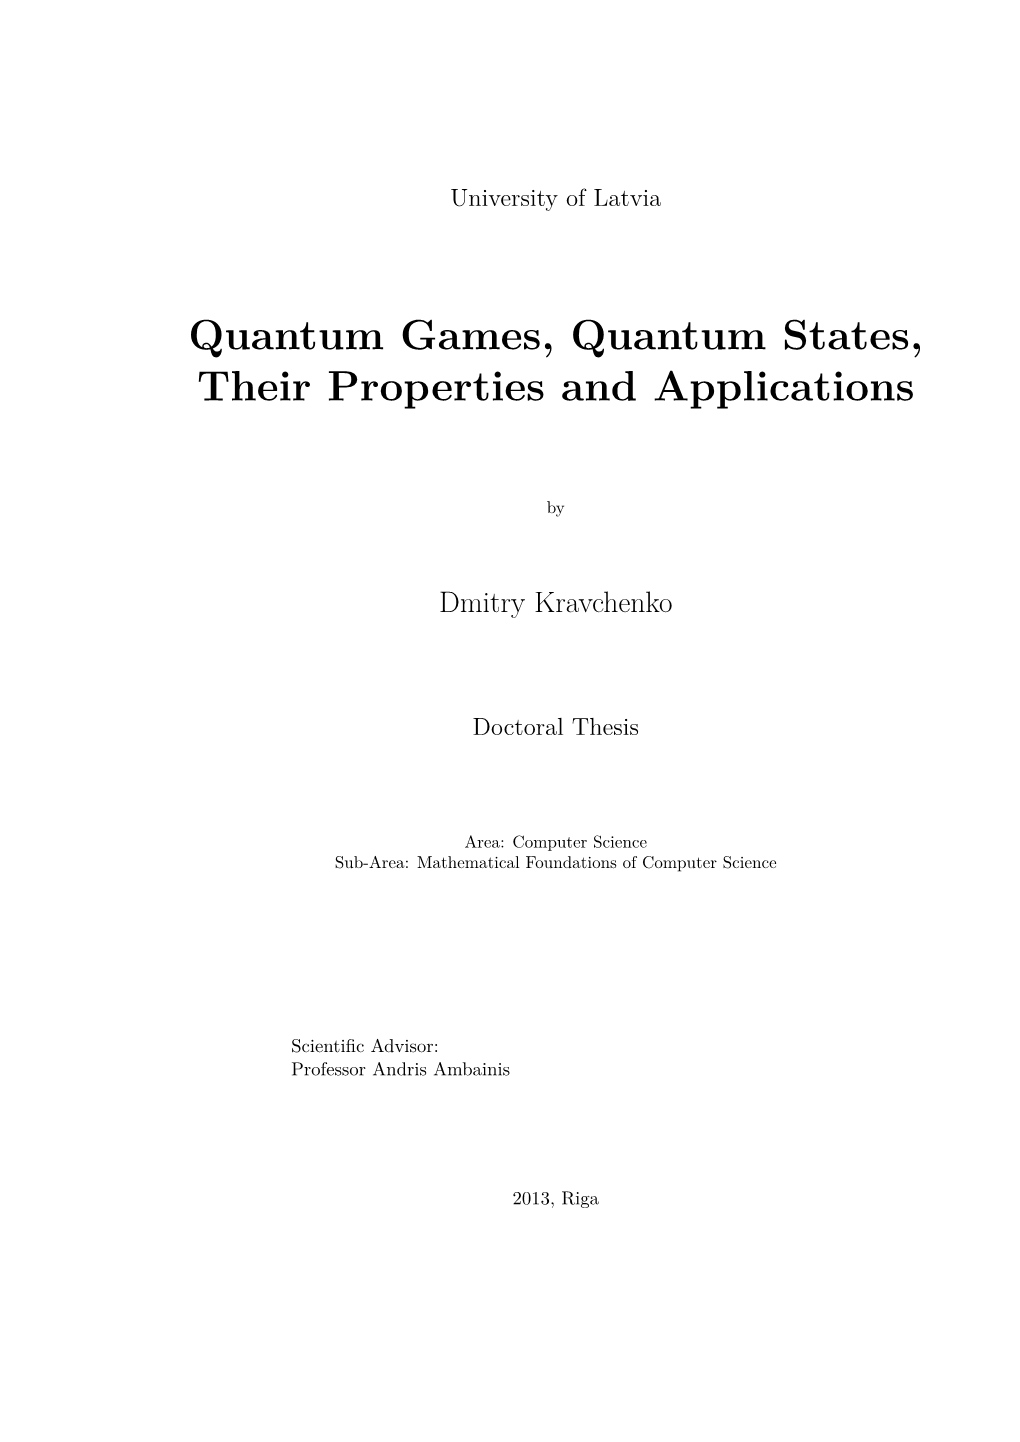 Quantum Games, Quantum States, Their Properties and Applications